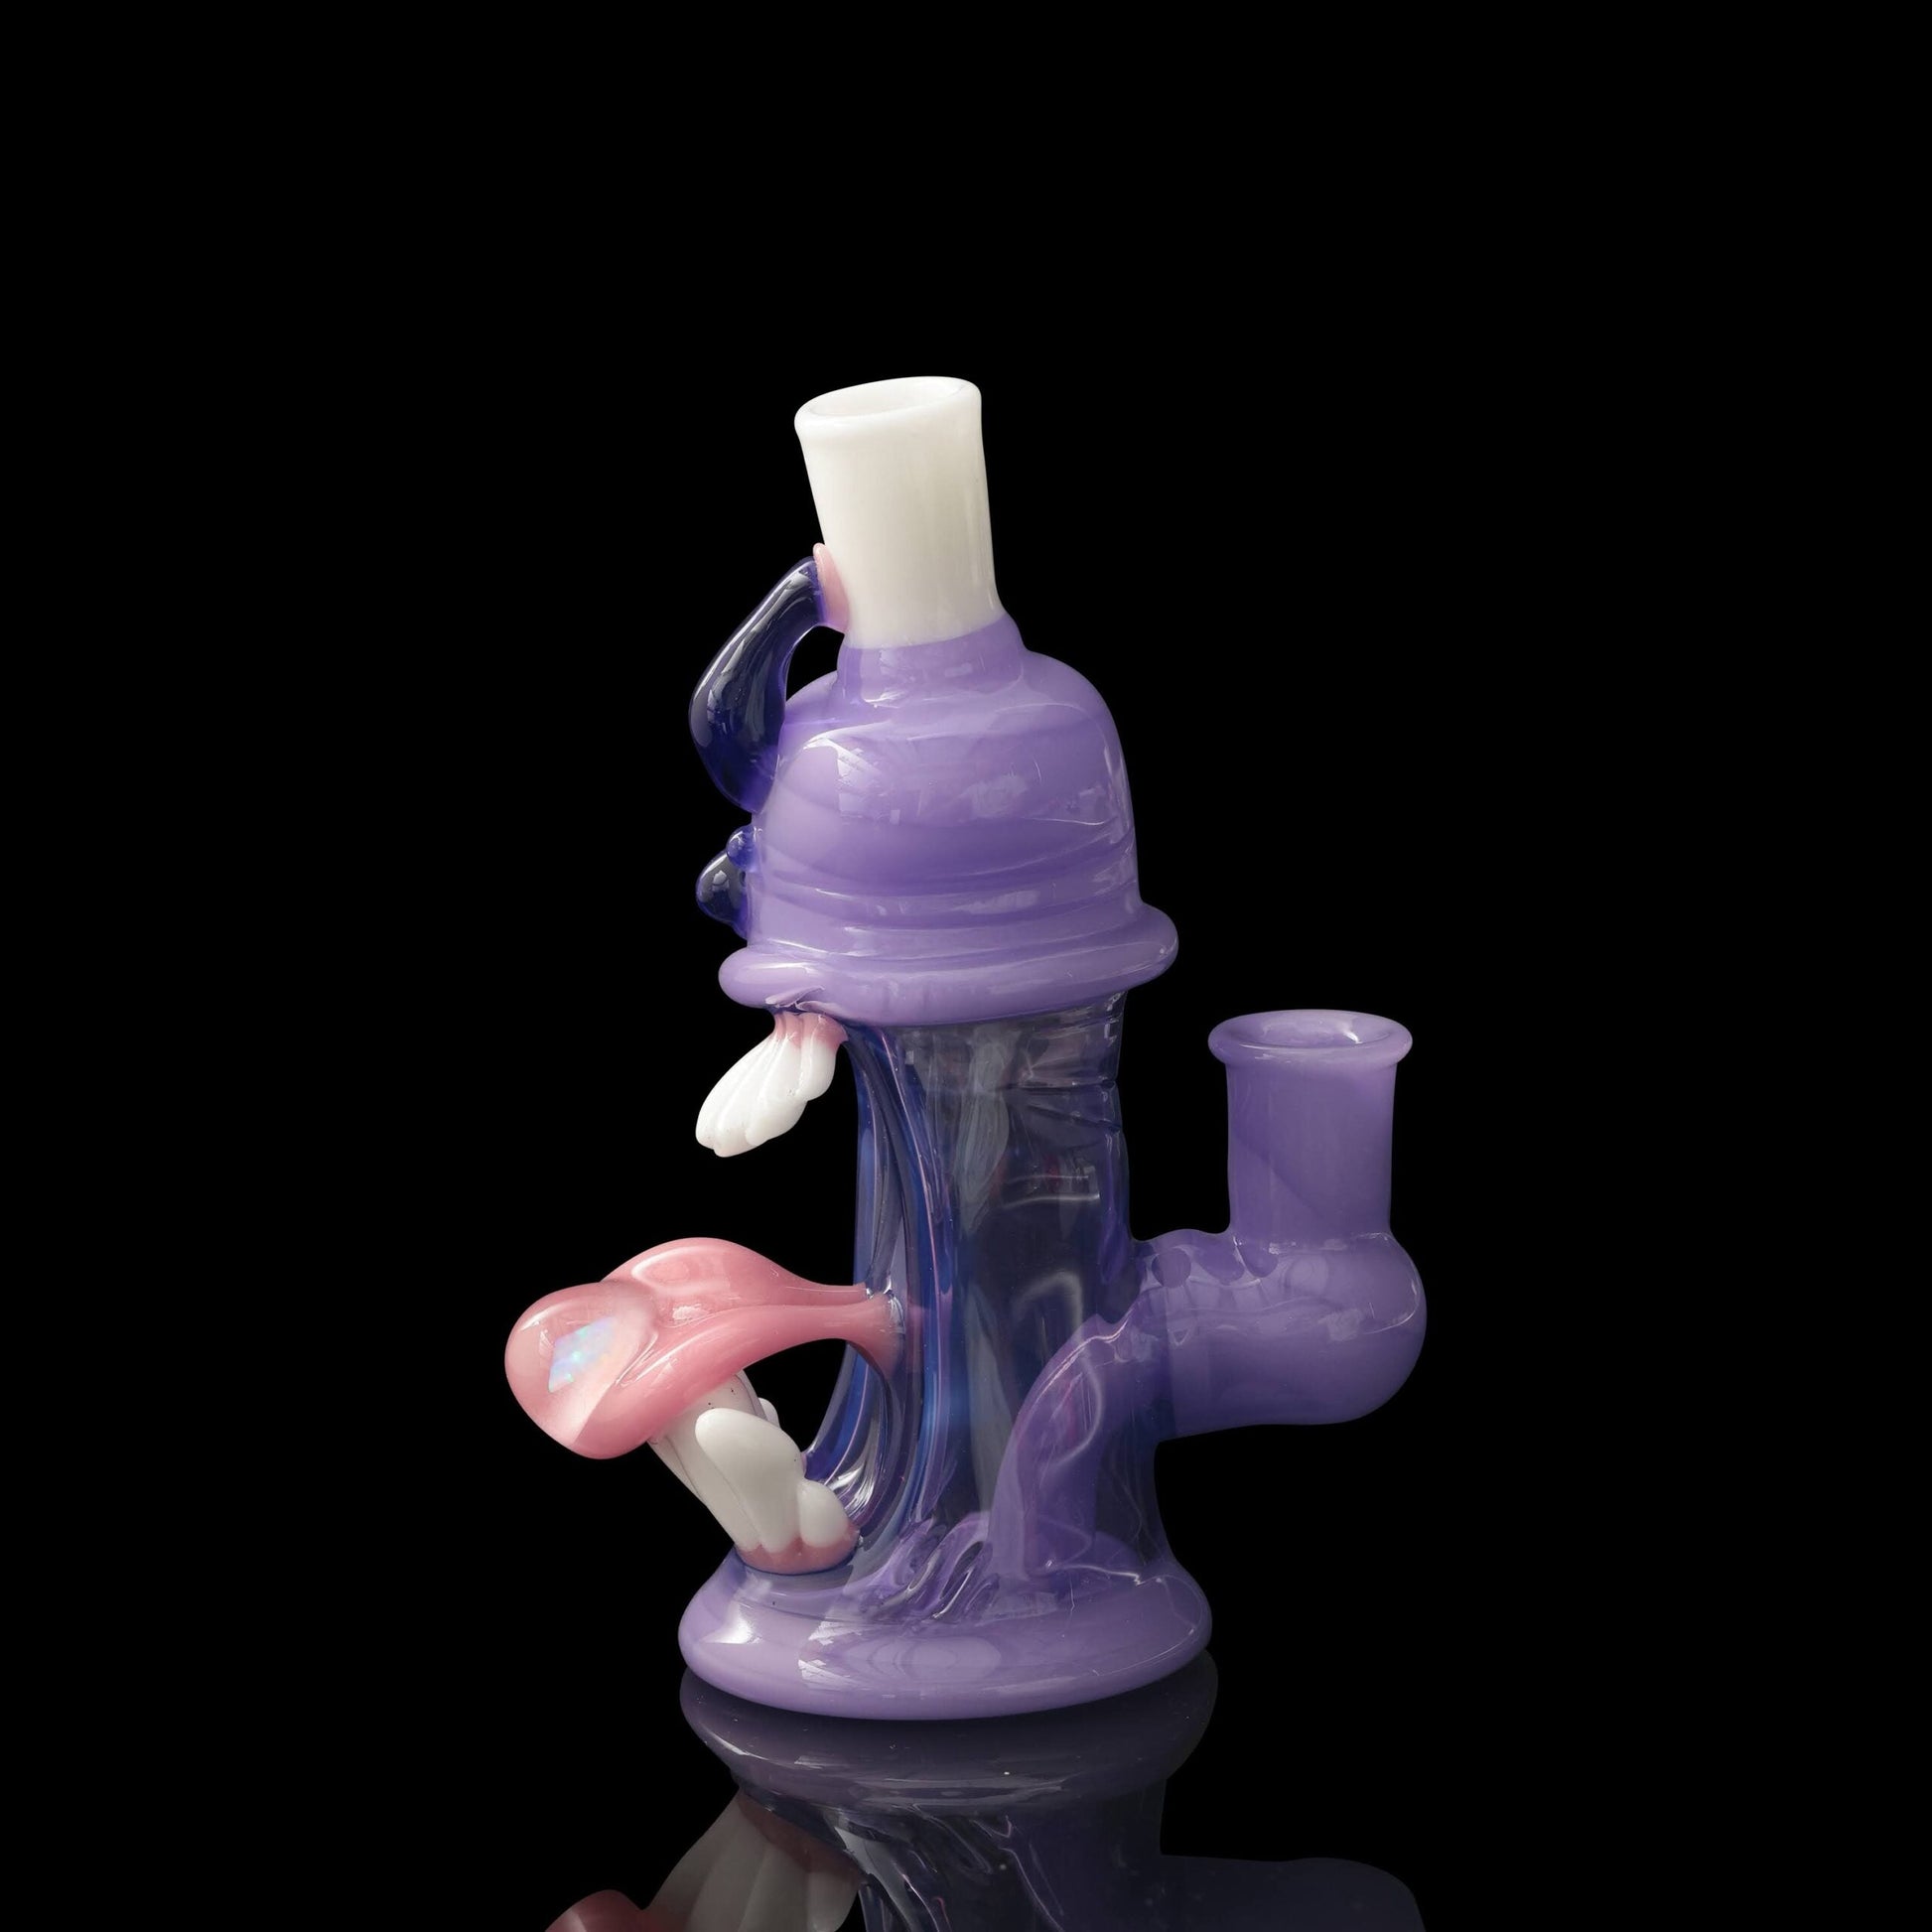 meticulously crafted design of the Purple Down & Dirty Mini Rig by GlassHole (2023)